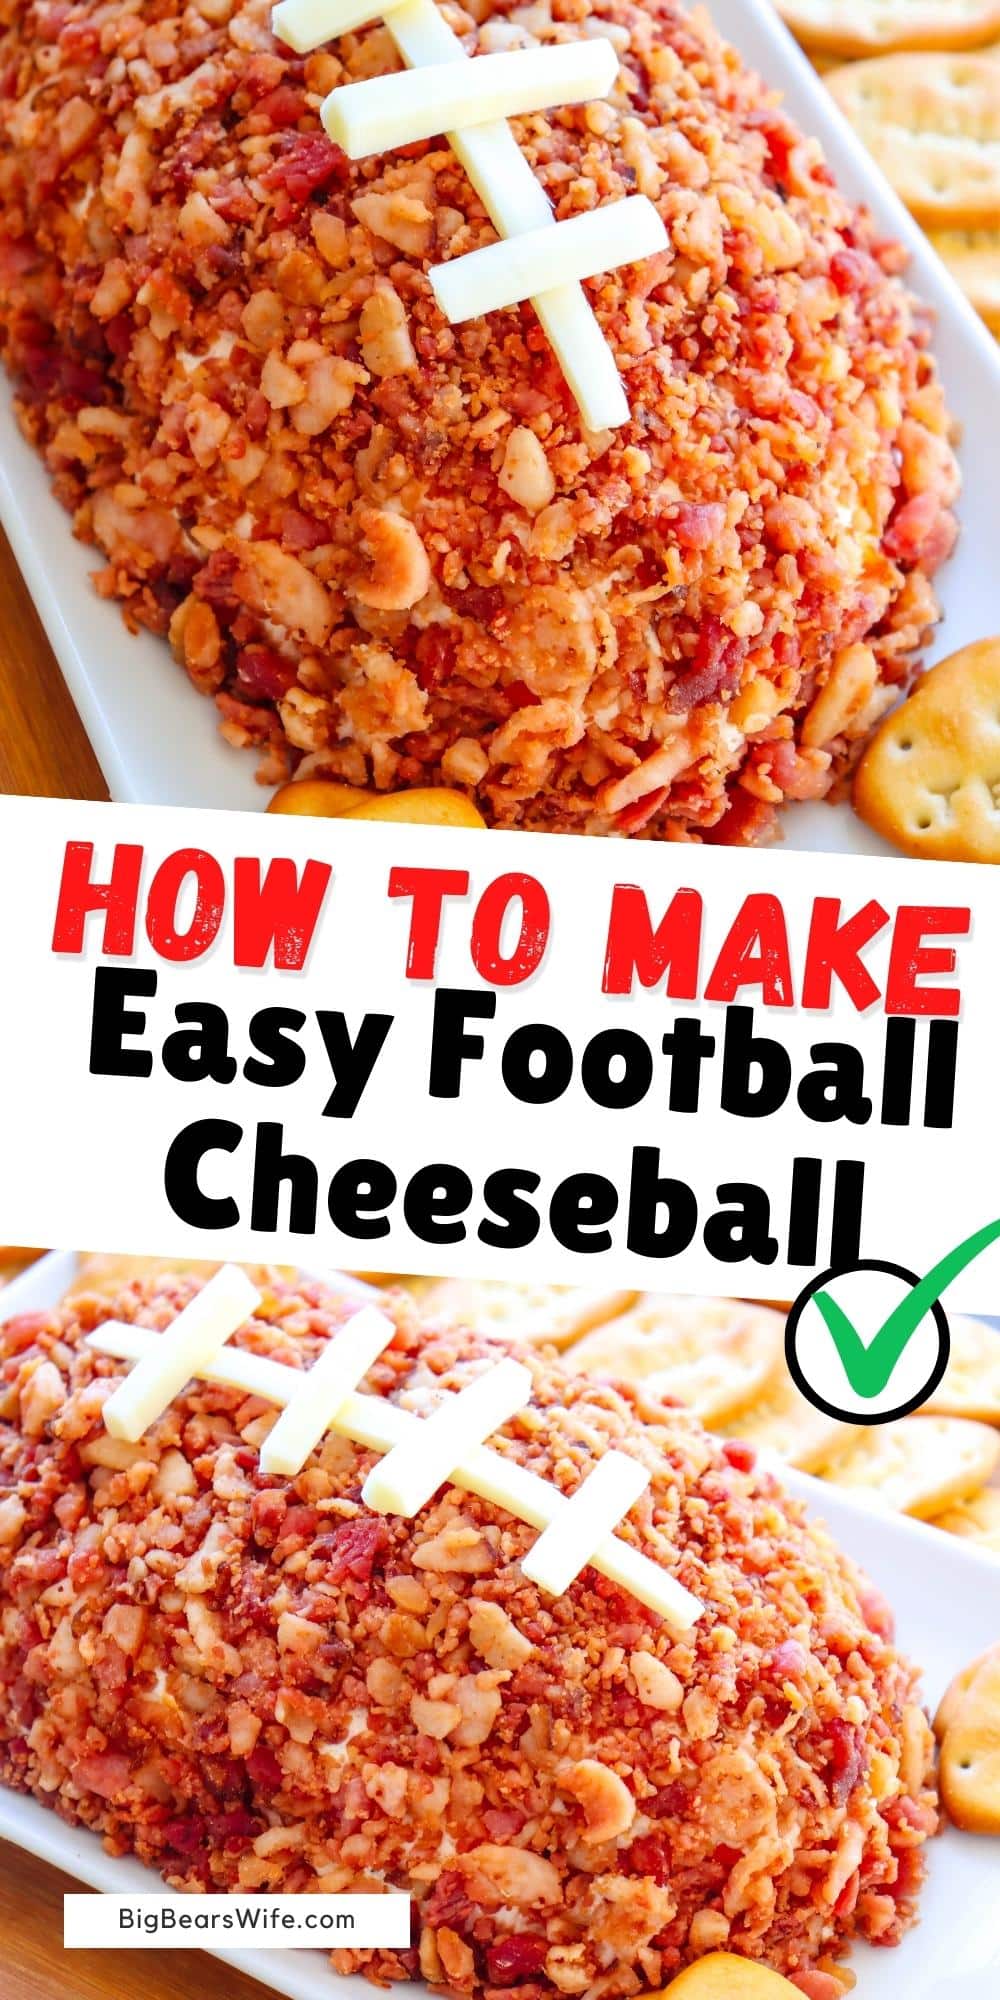 Make this Easy Football Cheeseball for the big game or any football party! You'll only need 5 ingredients and some plastic wrap to shape it! It'll be perfect for your game day spread! via @bigbearswife